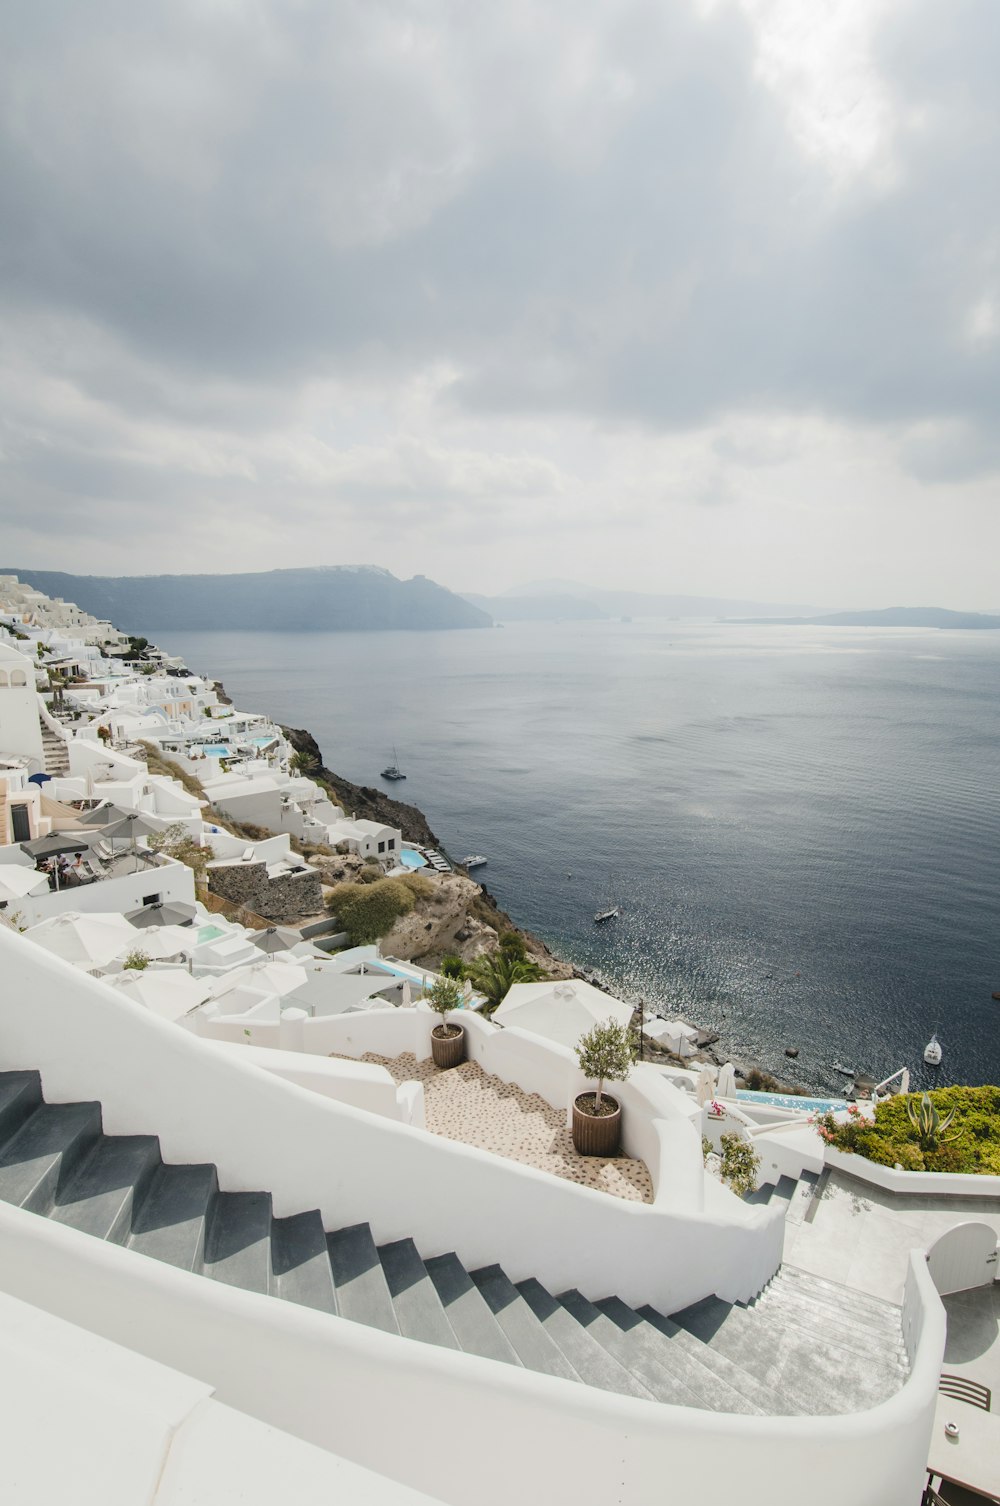 white seaside resorts viewing sea and mountain under white and gray sky